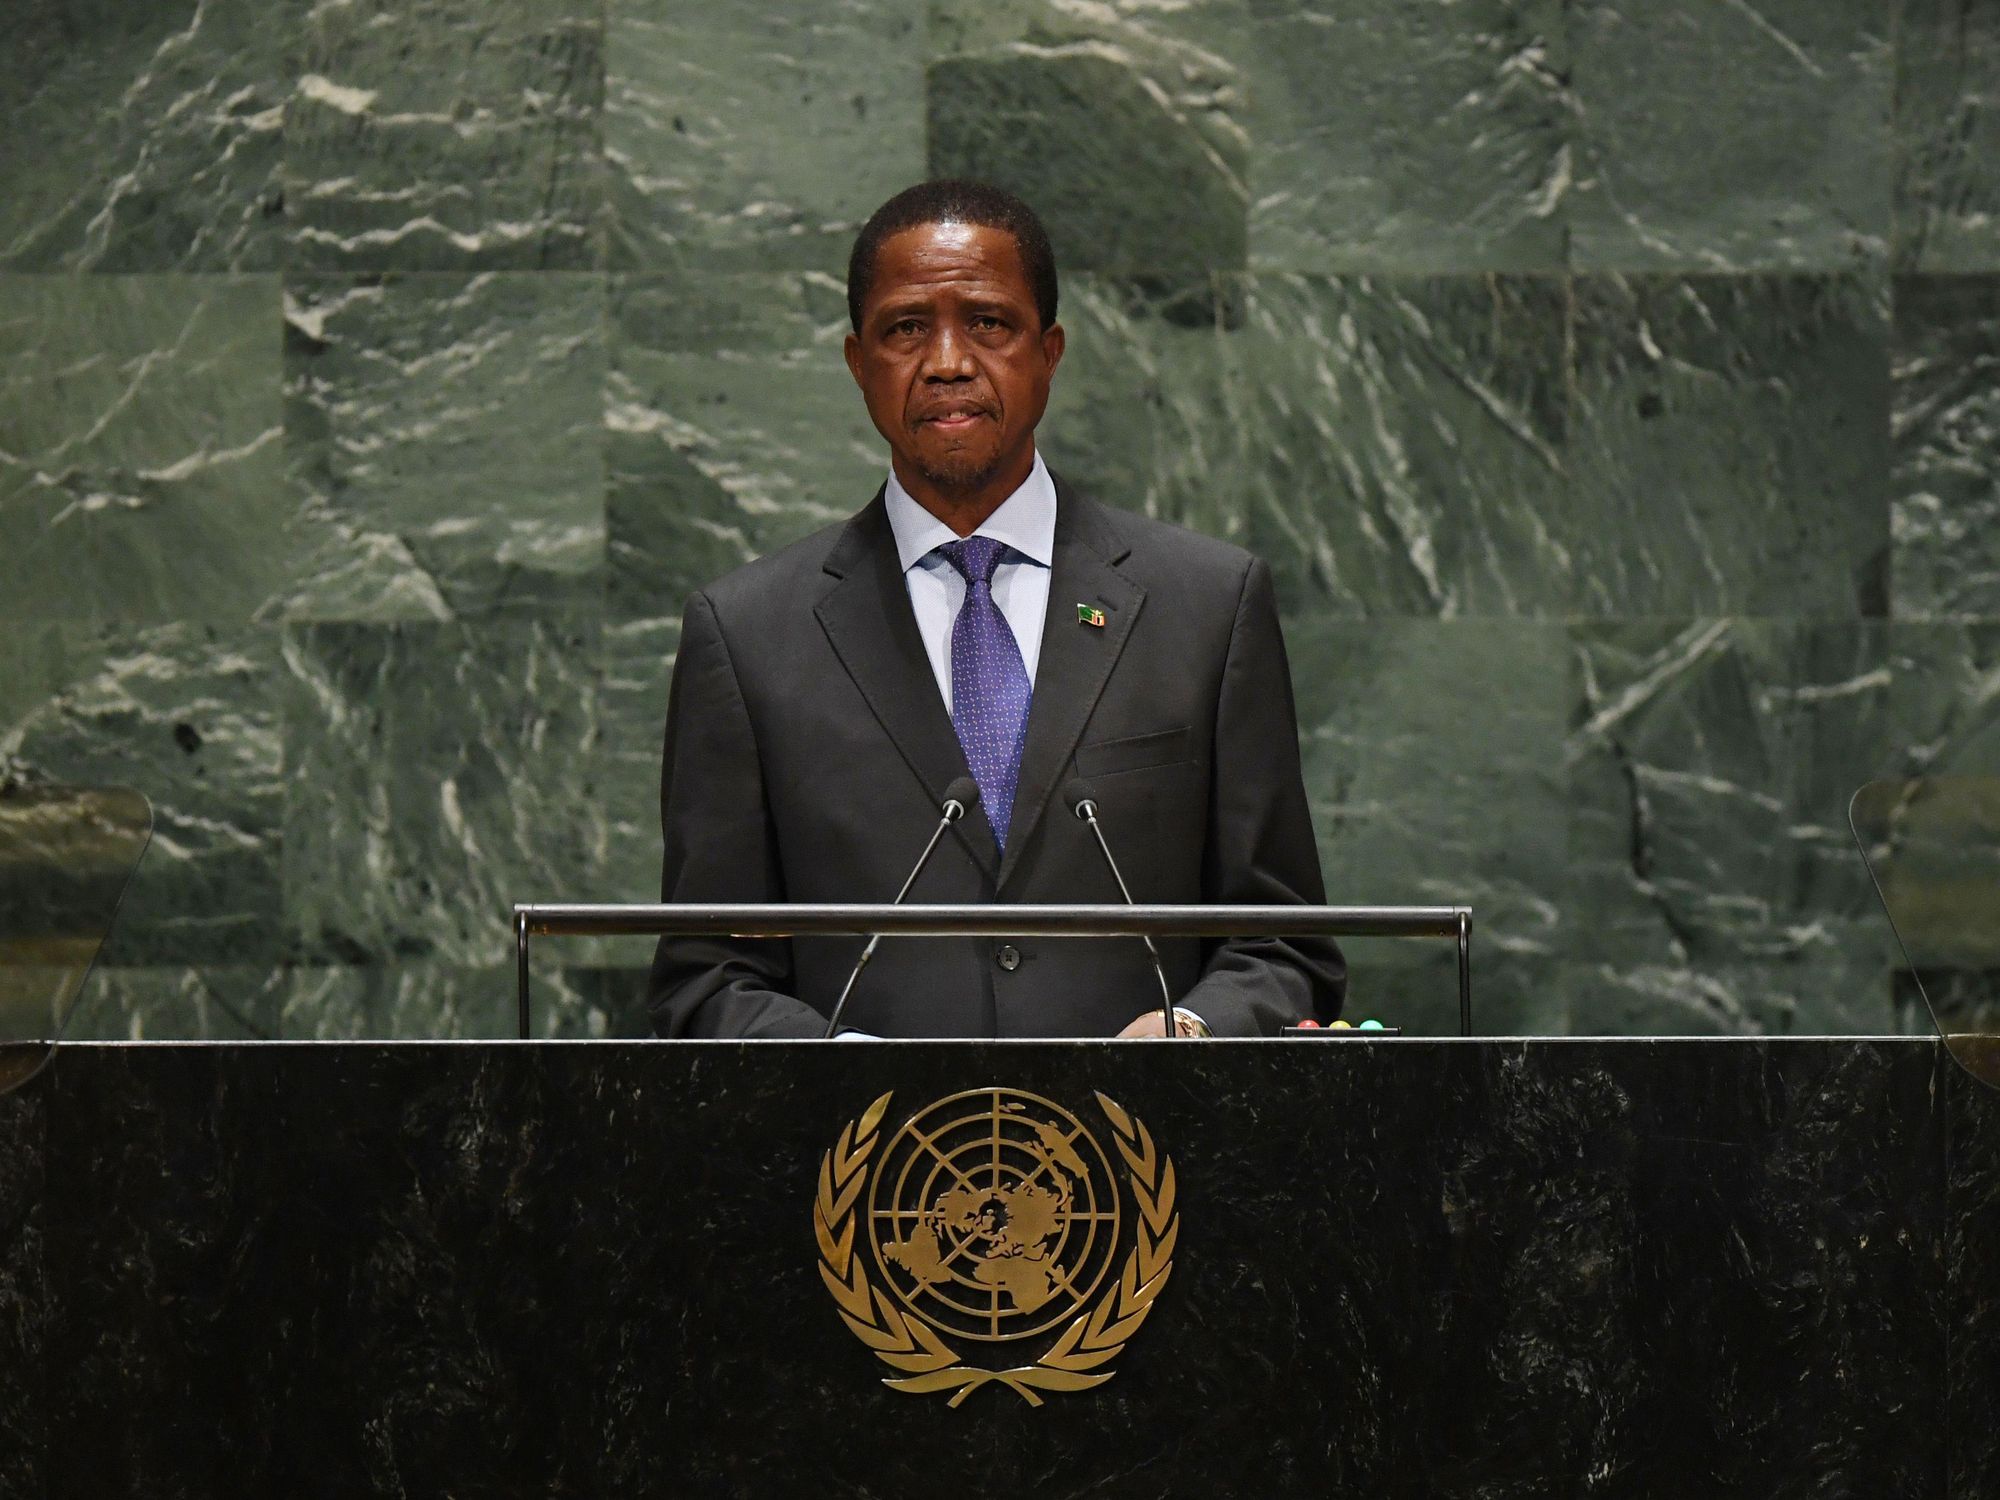 Zambian President Edgar Lungu Collapses During Televised Ceremony